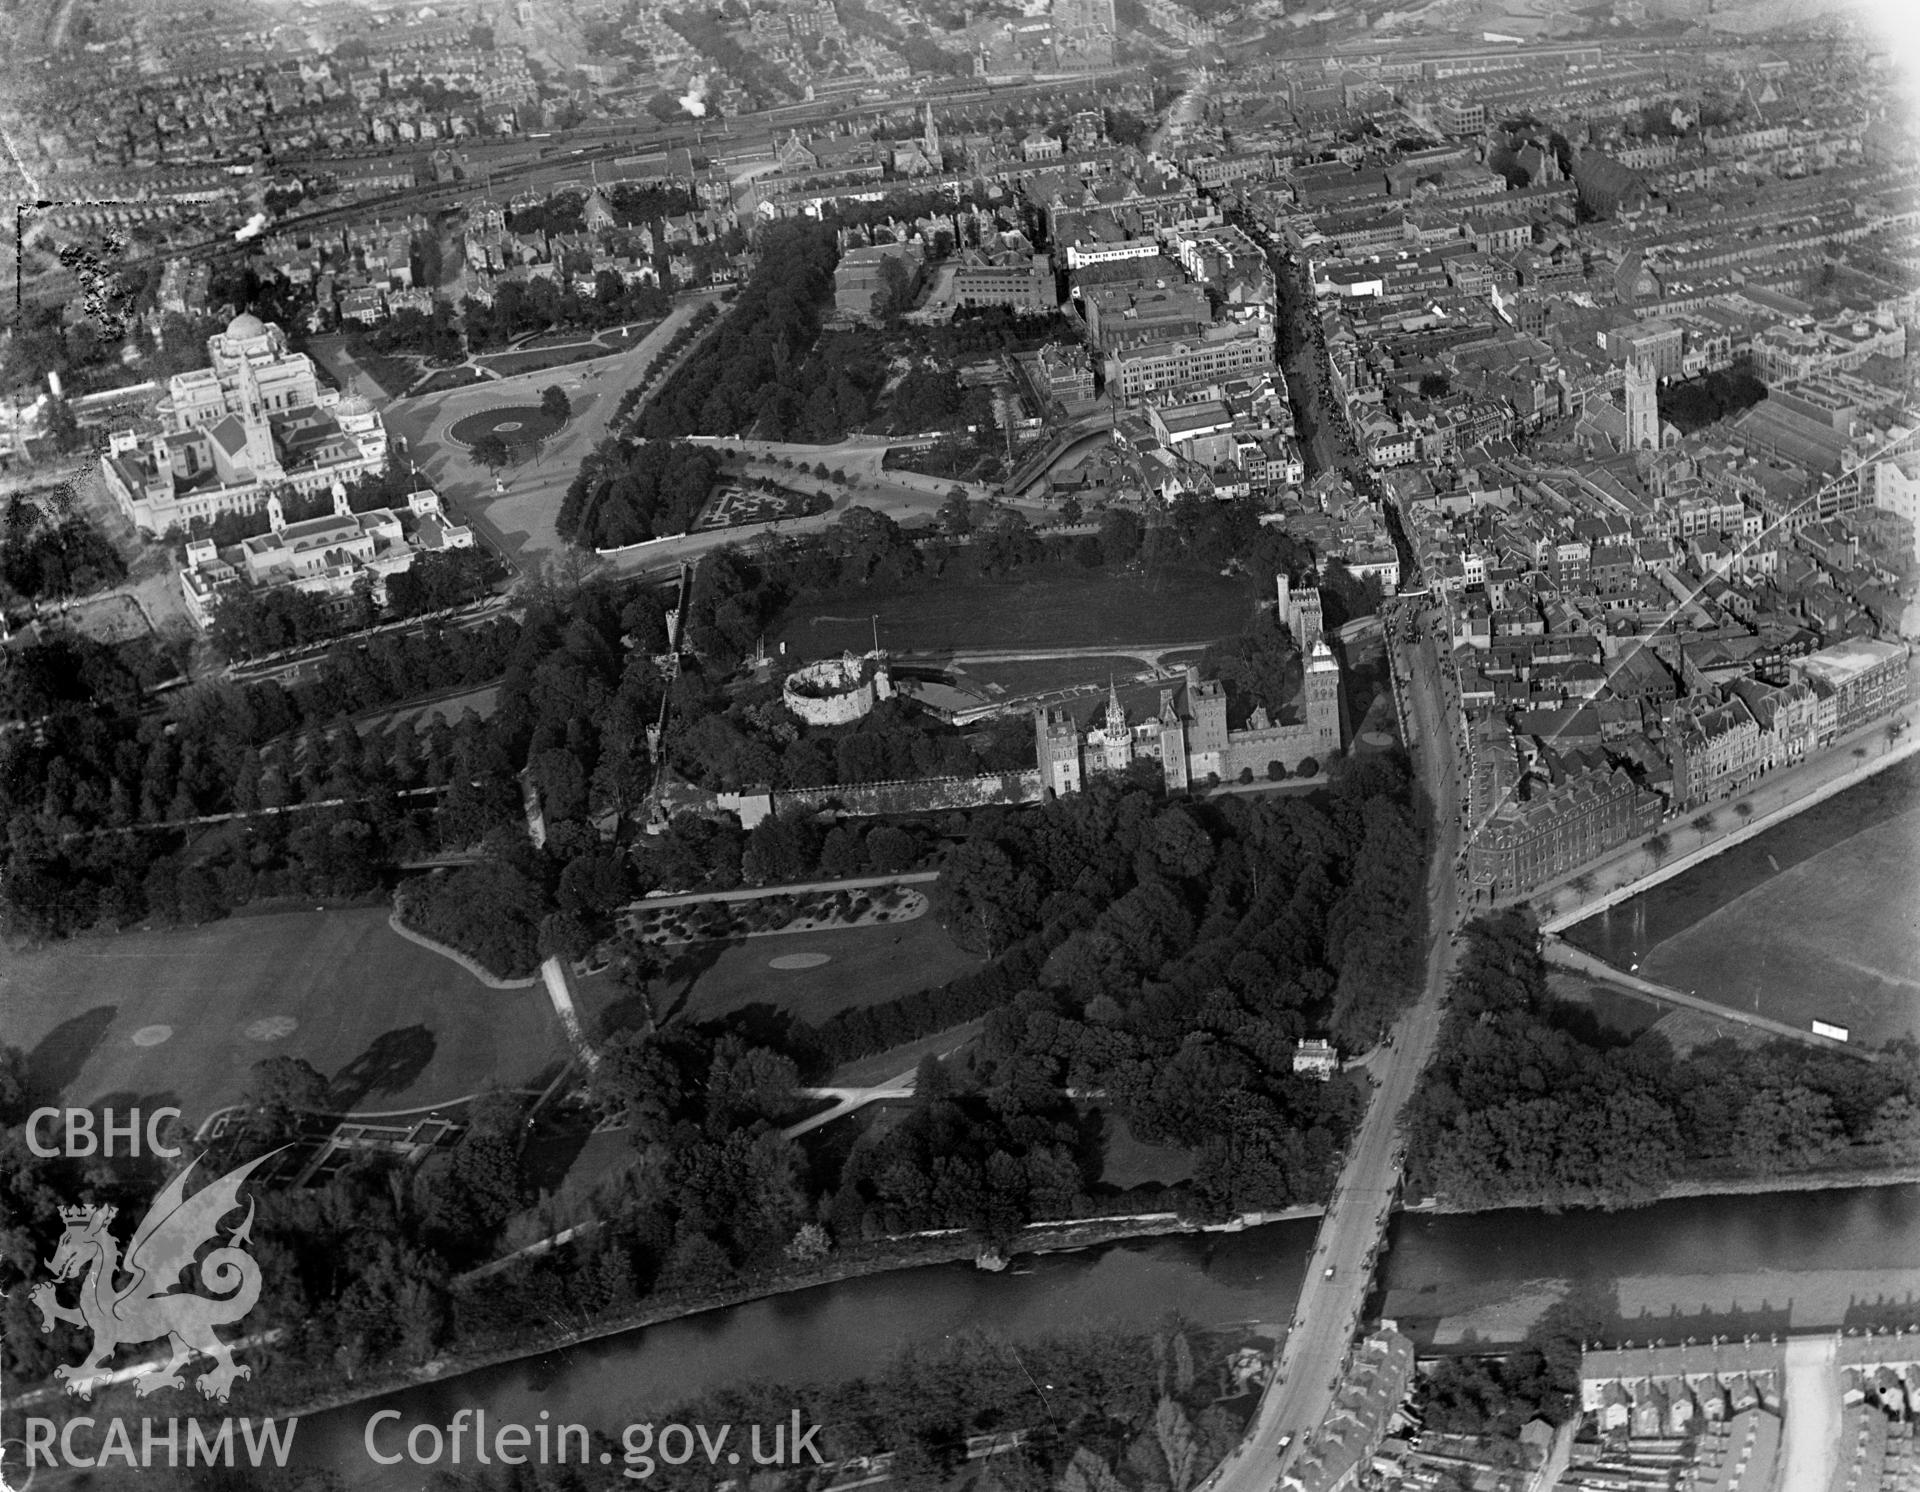 View of Cardiff showing castle, oblique aerial view. 5?x4? black and white glass plate negative.